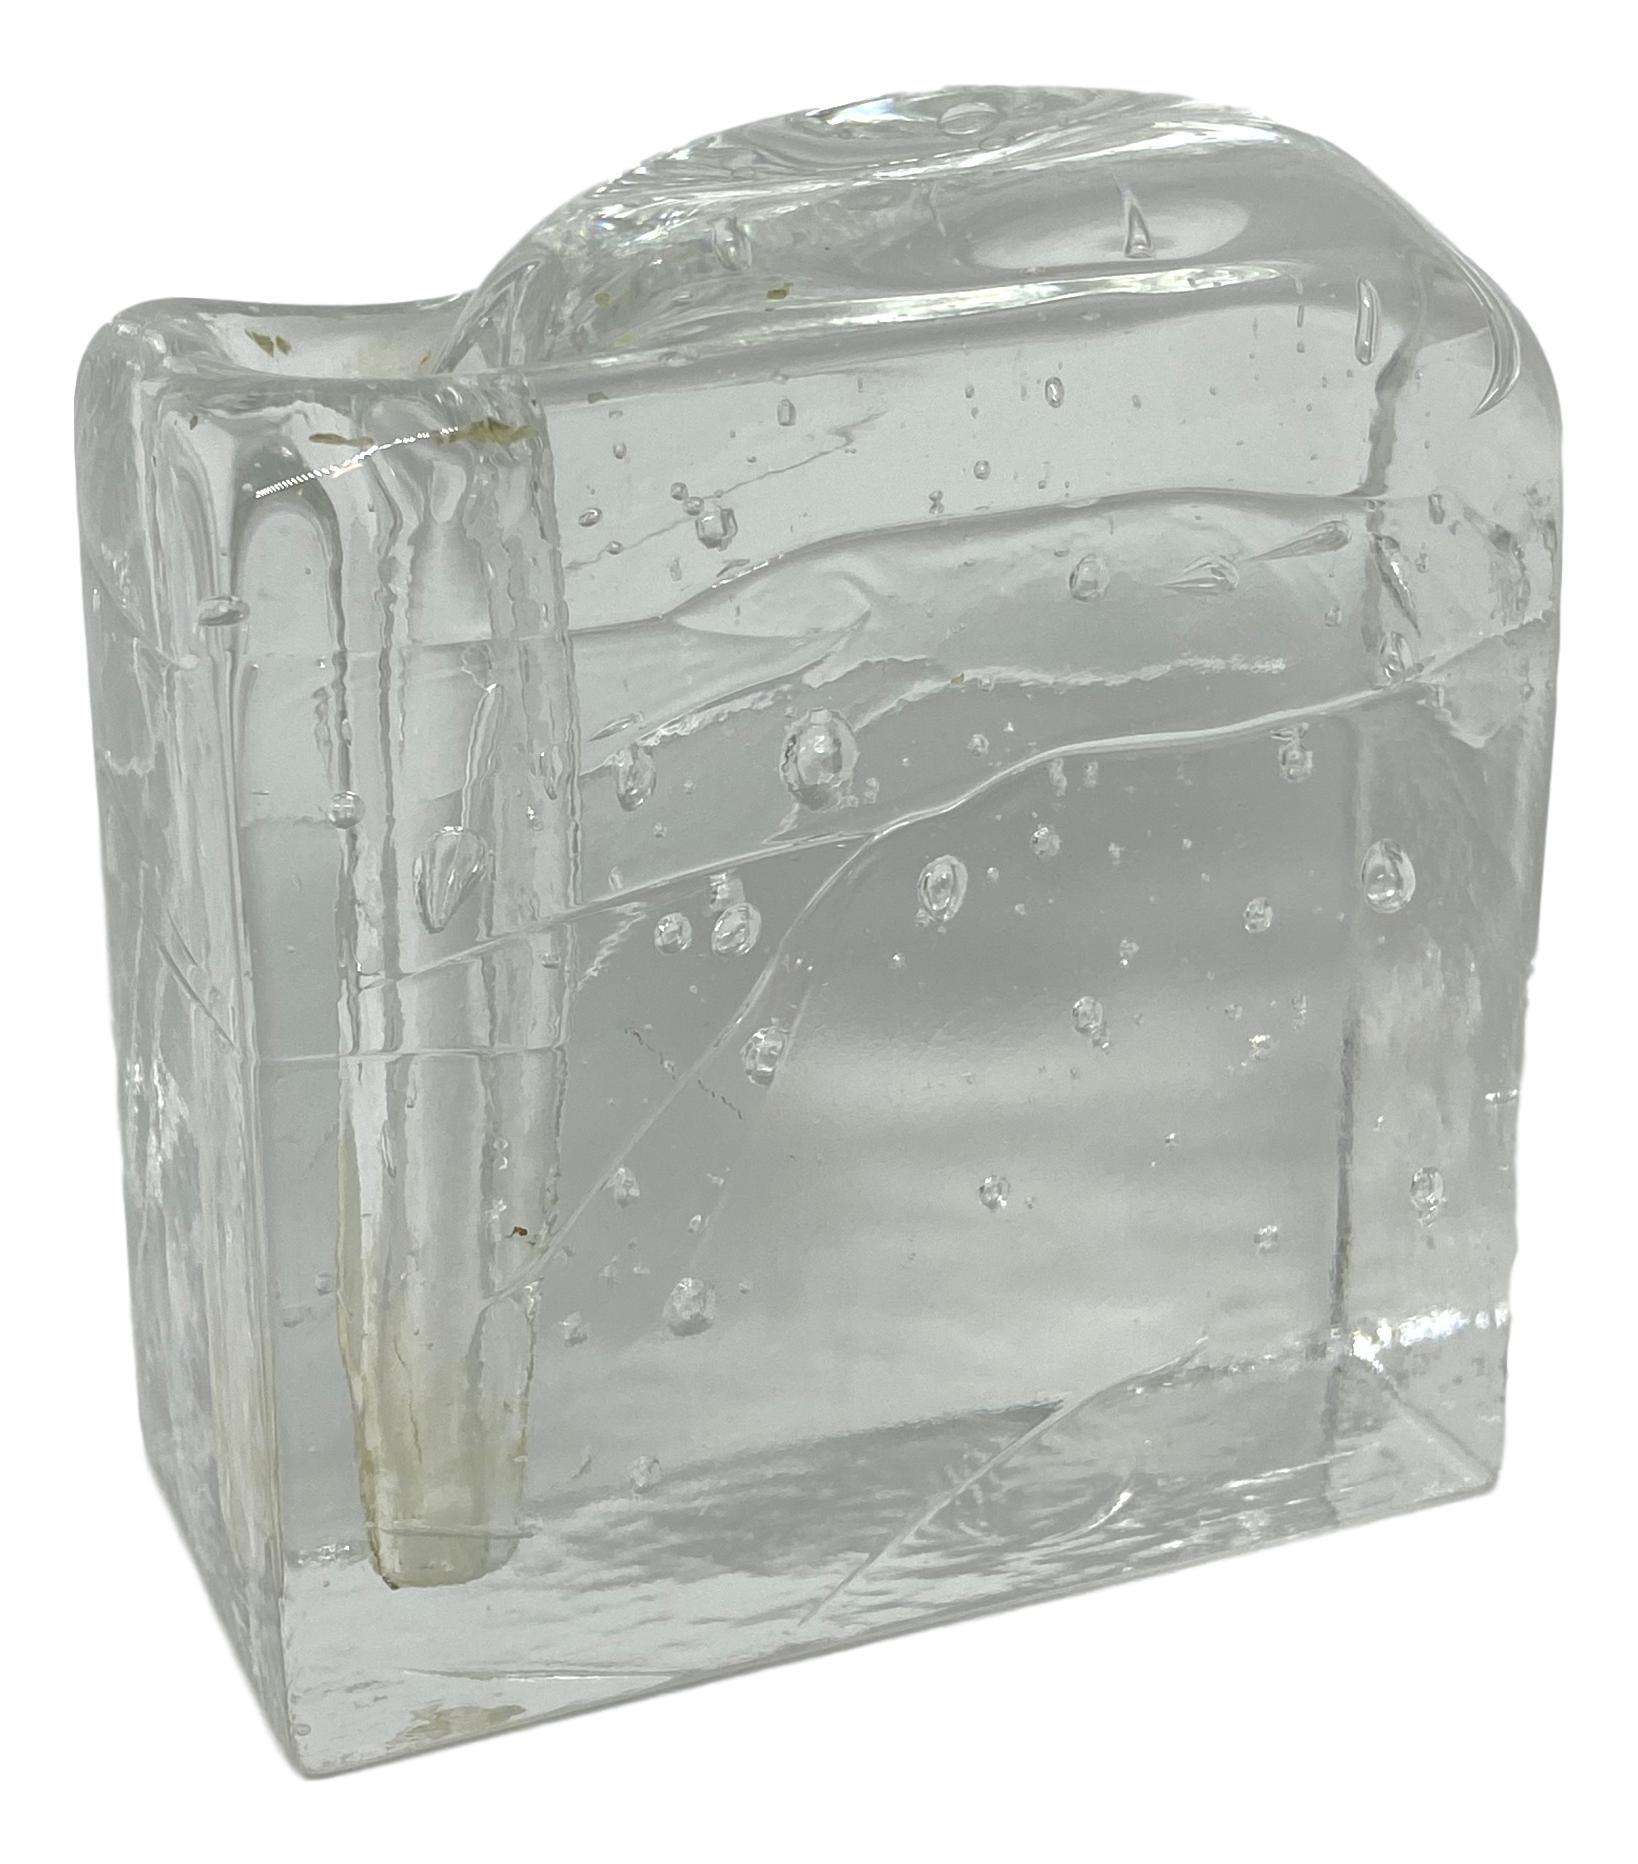 Collection of 2 Ice Block Glass 